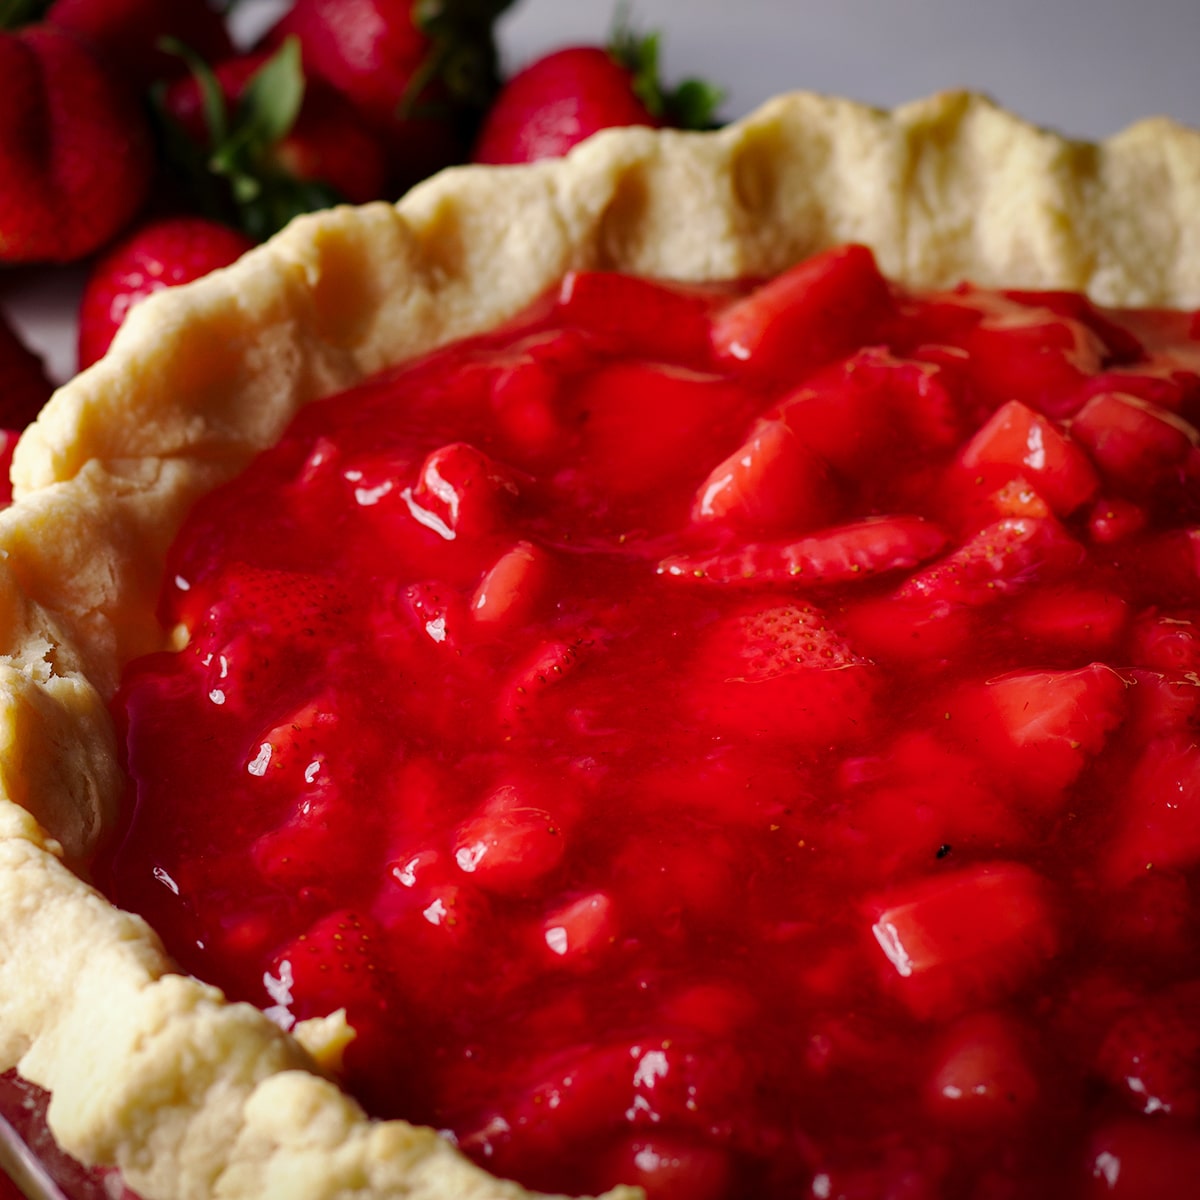 A partially baked pie crust that's been filled with pastry cream and strawberry pie filling.